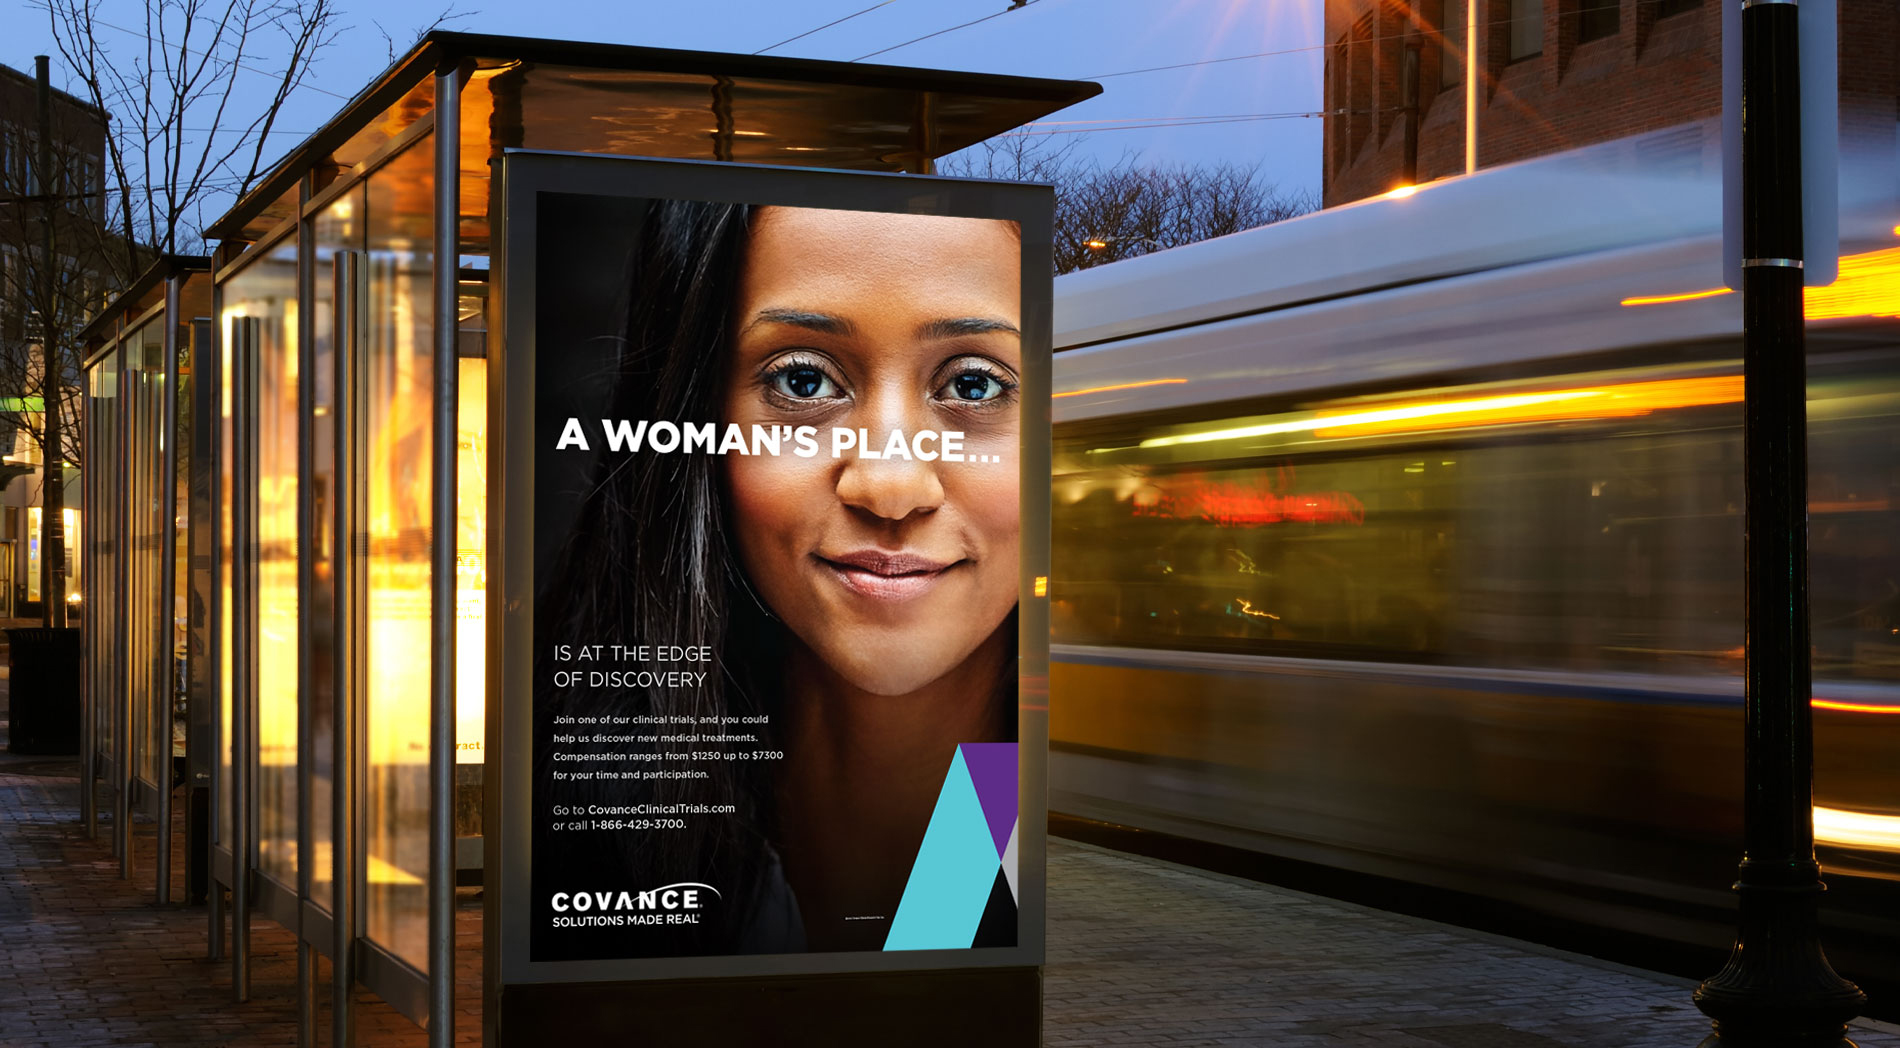 Covance bus shelter ad: A woman's place is at the edge of discovery